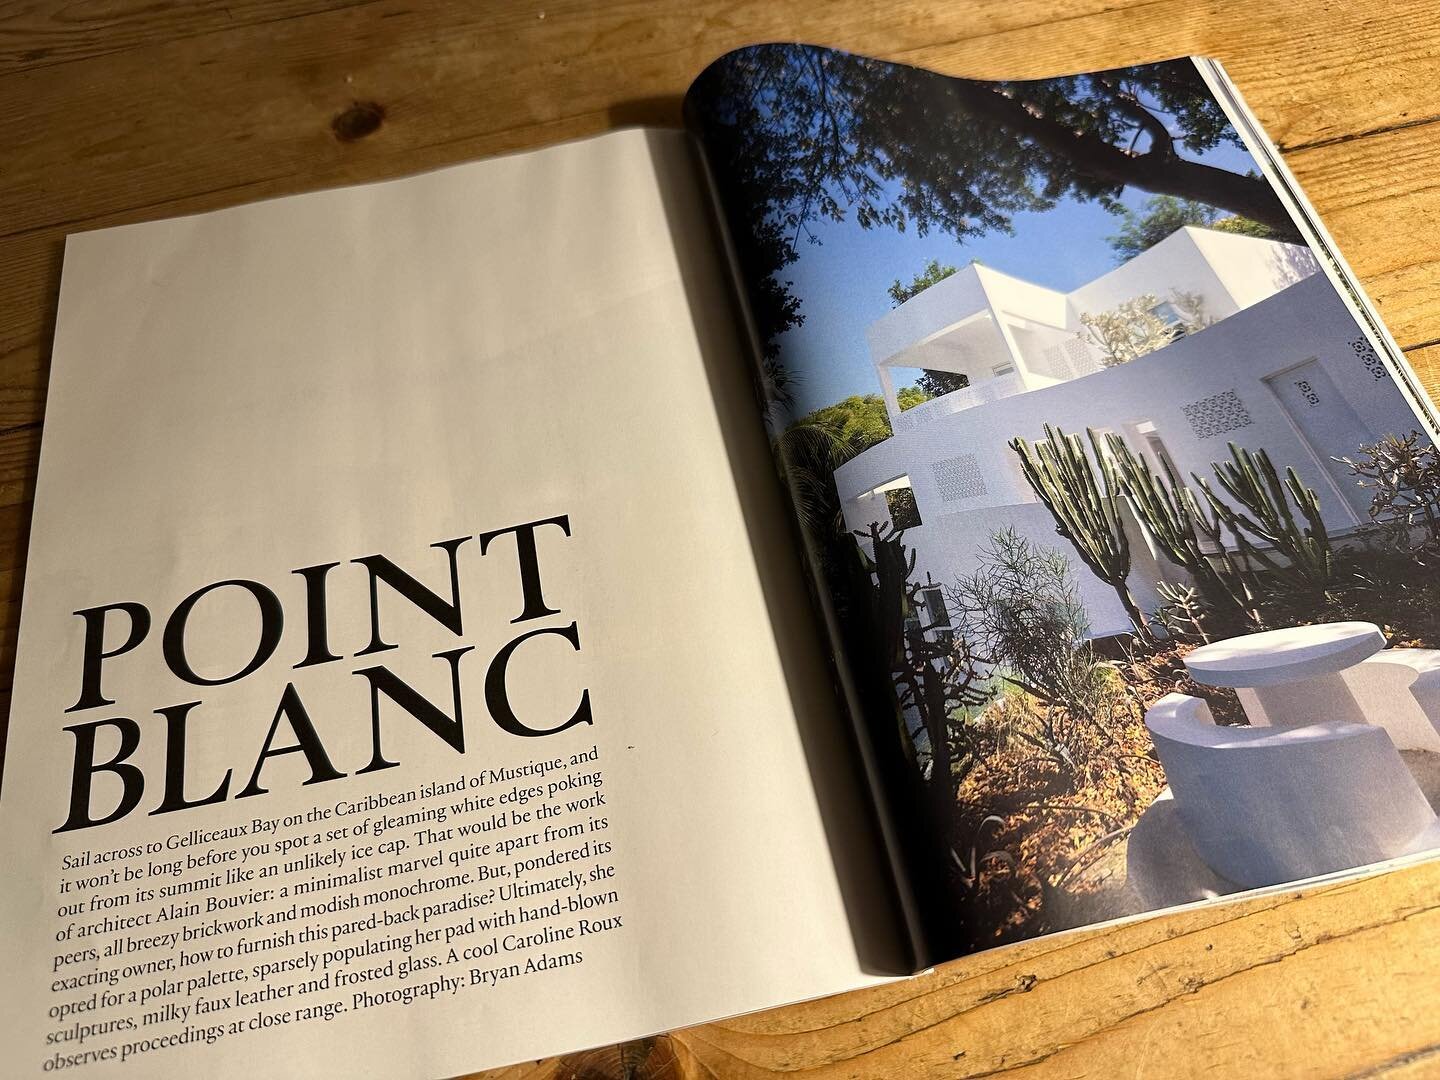 Thrilled to see this feature in the latest issue of World of Interiors. A garden that we planted a few years ago on the fairly arid tropical island of Mustique in the Grenadines. Thanks to Caroline Roux who wrote about the renovation of the existing 